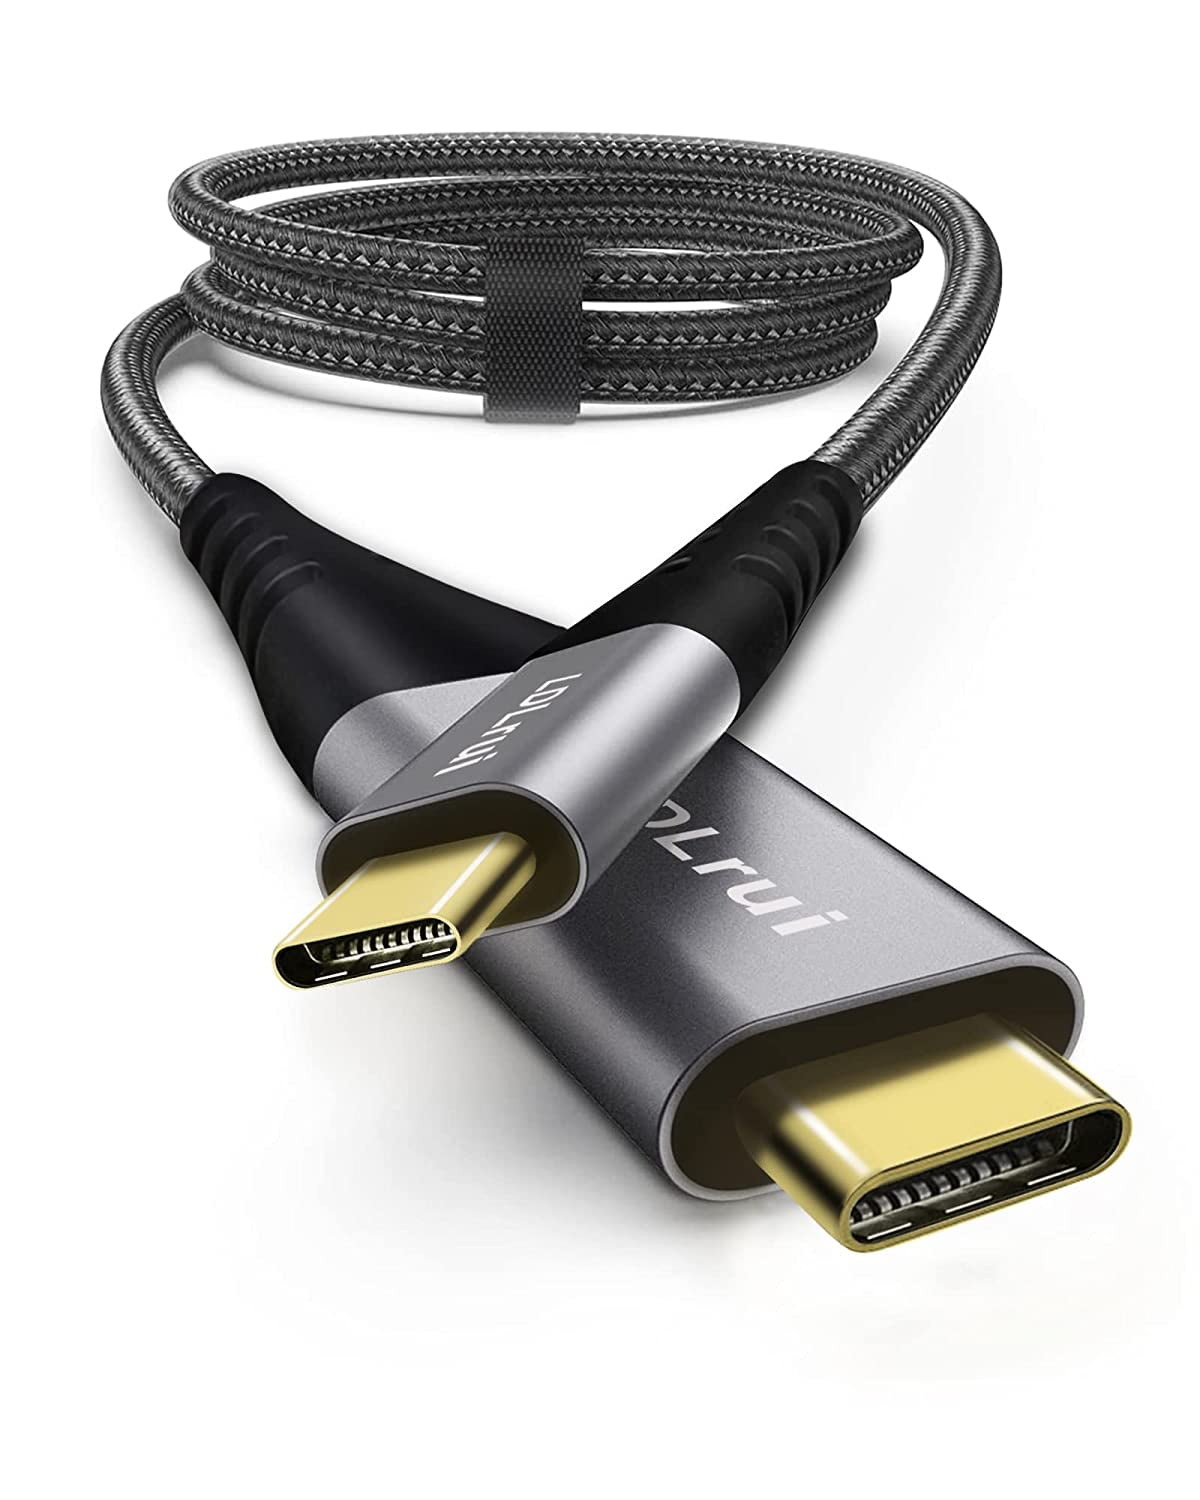 6ft Type C Charge Cable and 3.1 AMP 2 Port USB and Type-C Adapter Bundle -  Armor All